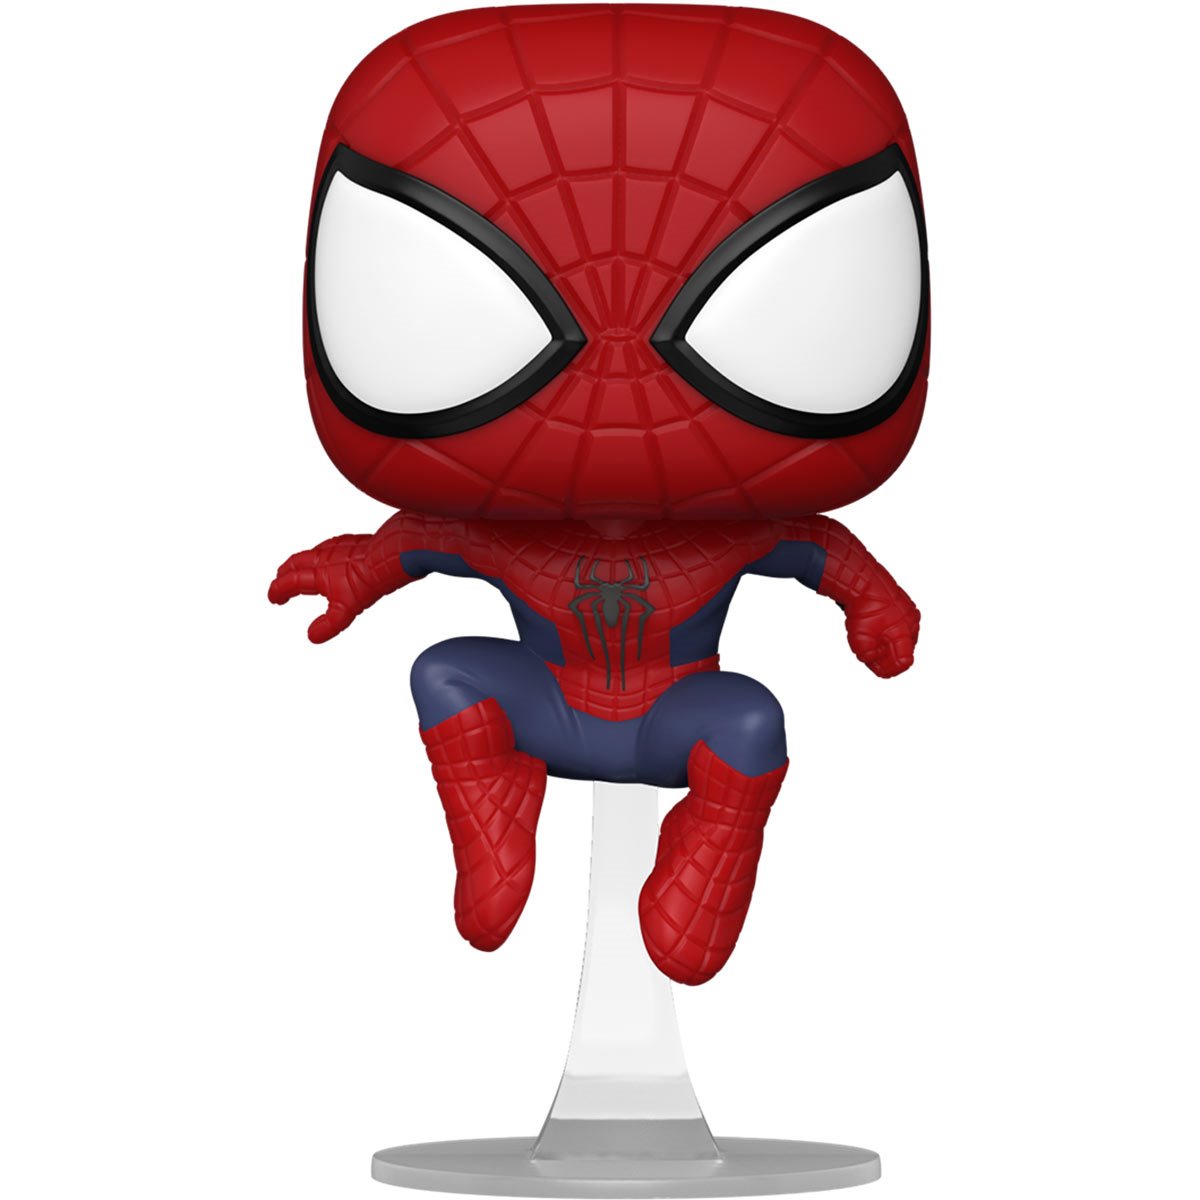 Spider-Man Spinneret Funko Pop Exclusive Is Up for Pre-Order